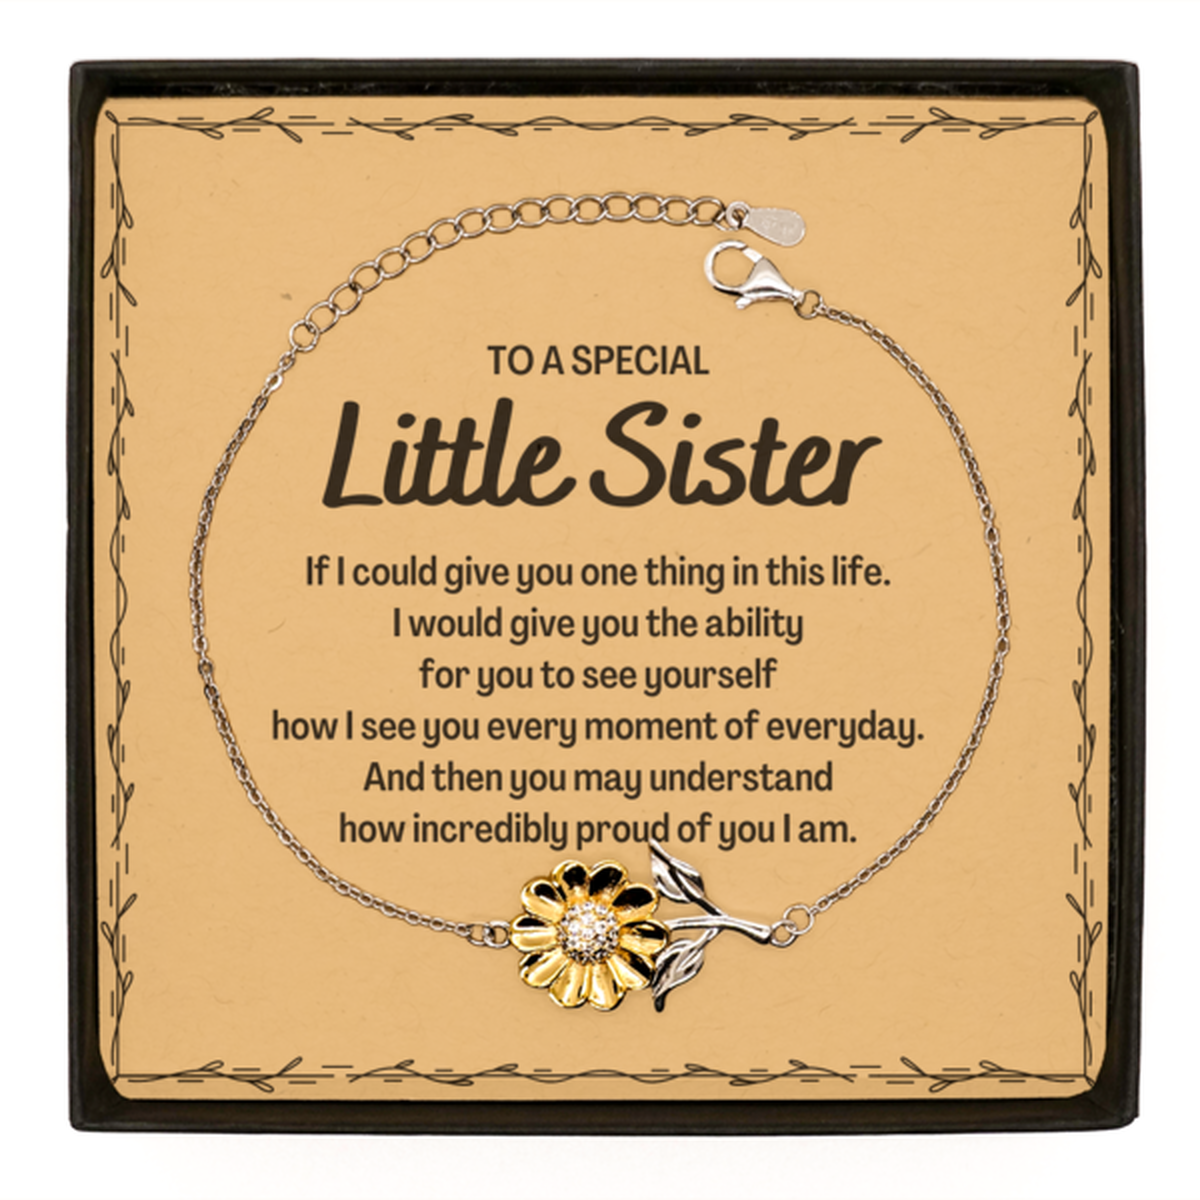 To My Little Sister Sunflower Bracelet, Gifts For Little Sister Message Card, Inspirational Gifts for Christmas Birthday, Epic Gifts for Little Sister To A Special Little Sister how incredibly proud of you I am